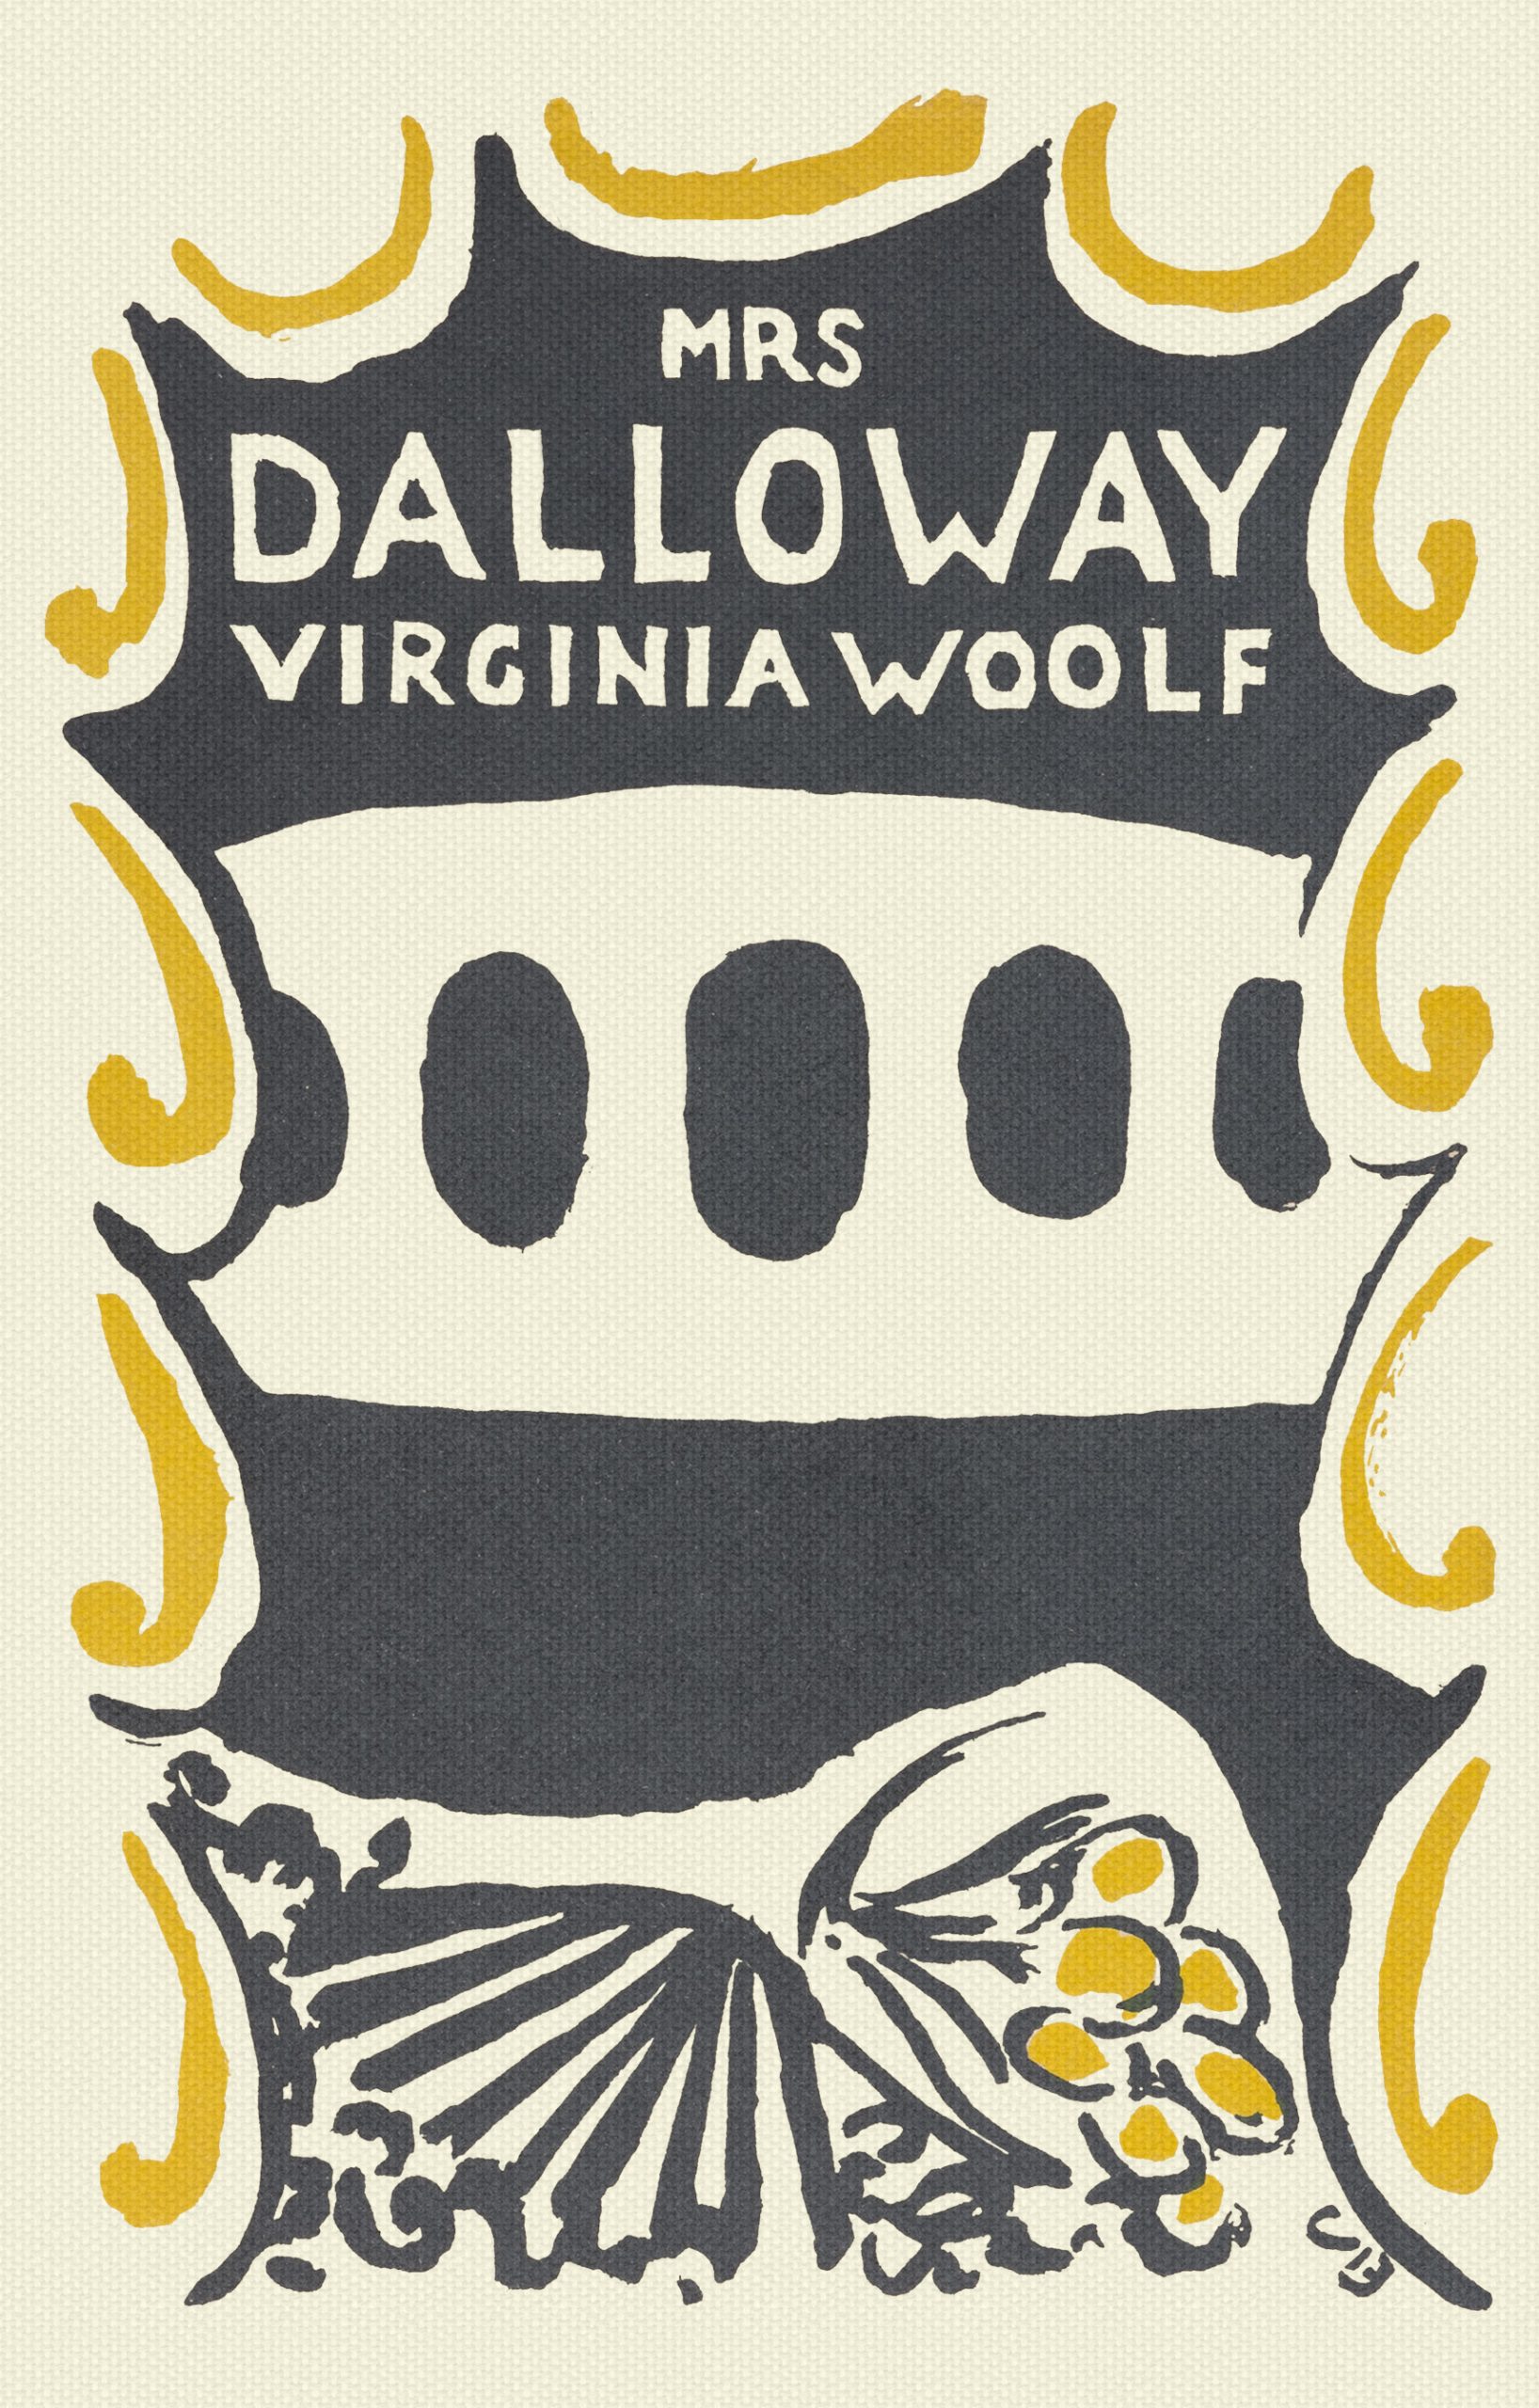 Cover of Mrs. Dalloway